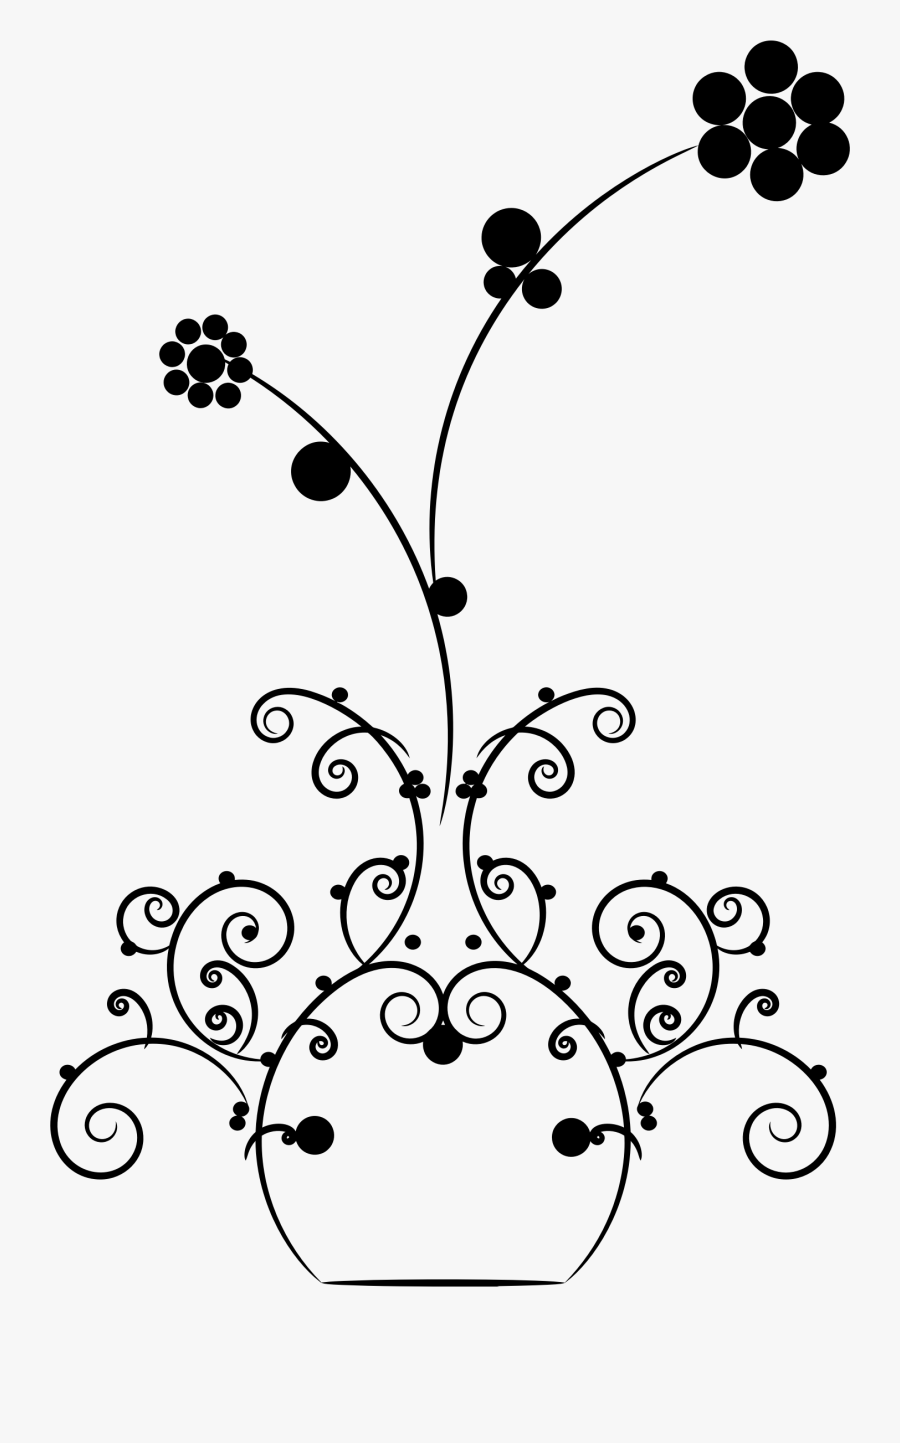 Abstract Flourish Vase With Flowers - Vase, Transparent Clipart